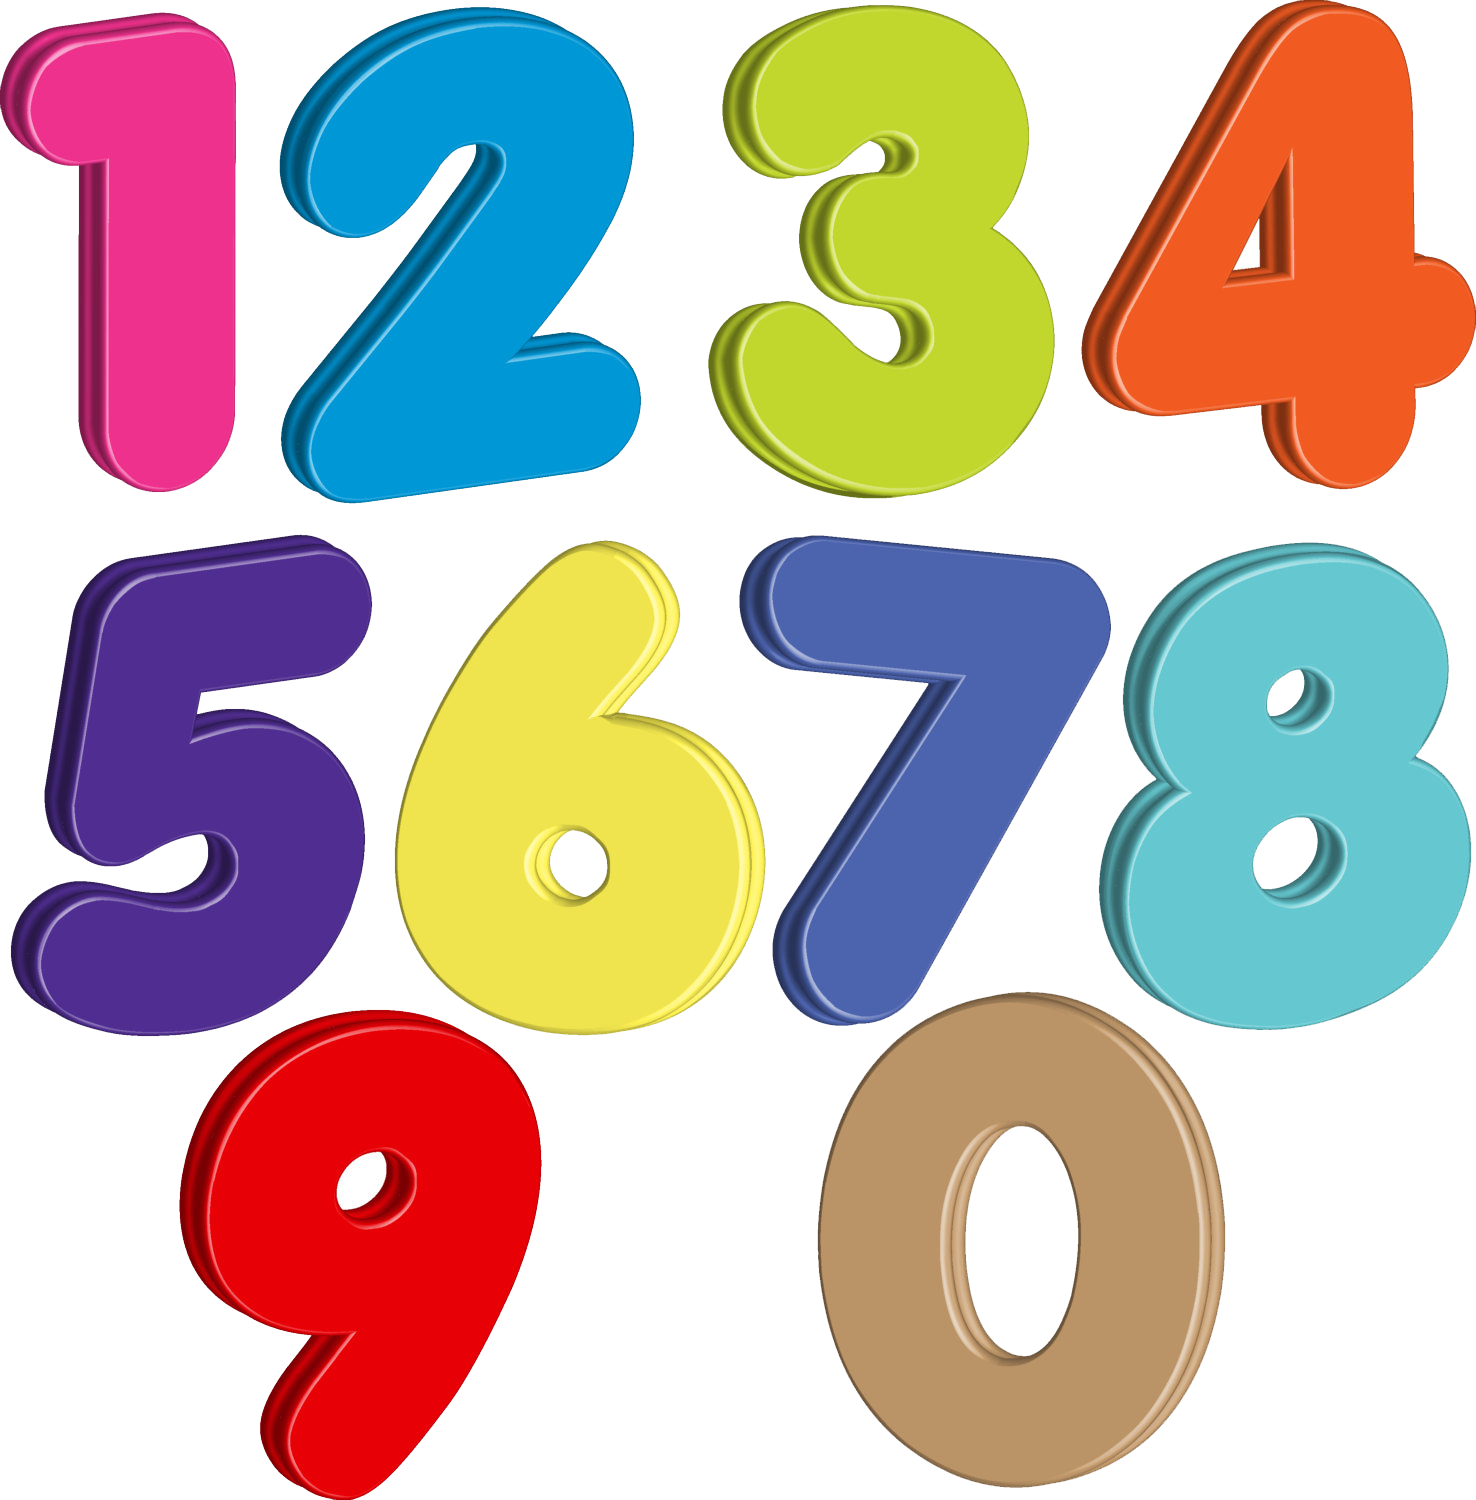 Free Clipart Numbers Transparent Background and other clipart images on Cliparts pub™